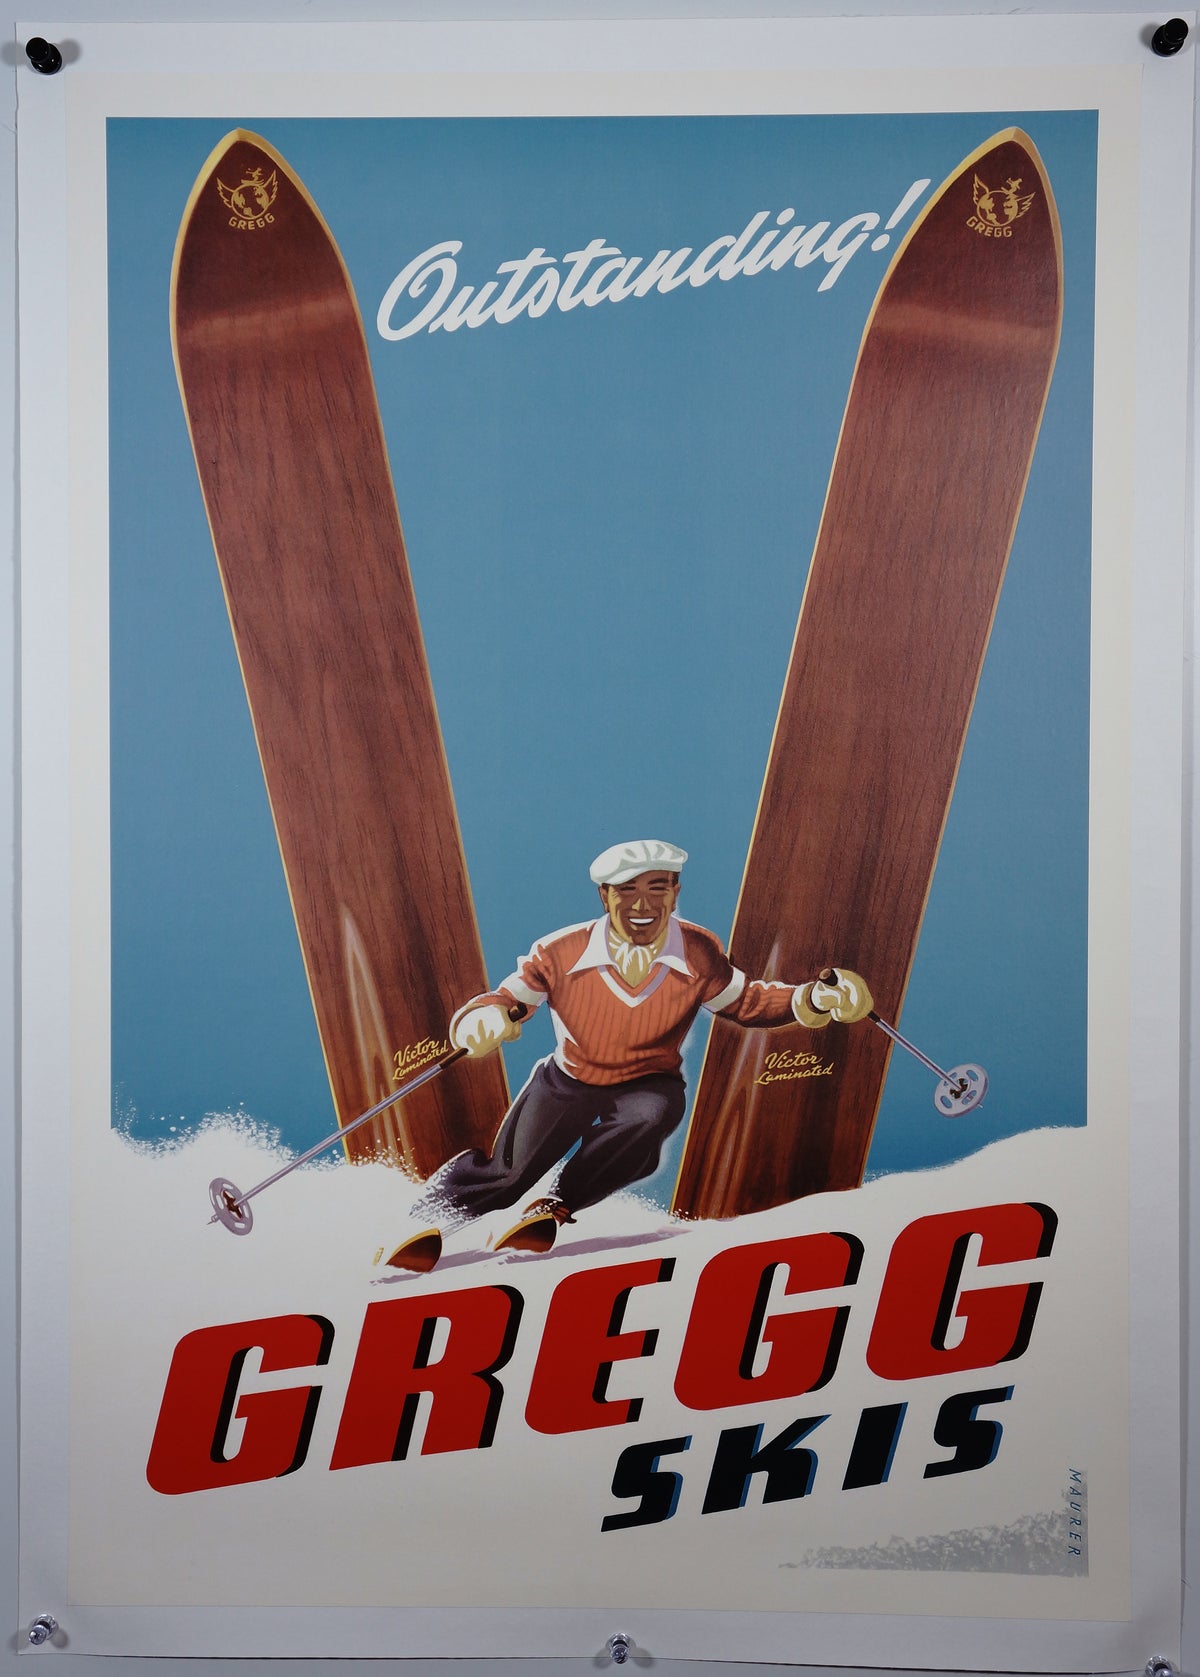 Gregg Skis - Authentic Vintage Poster